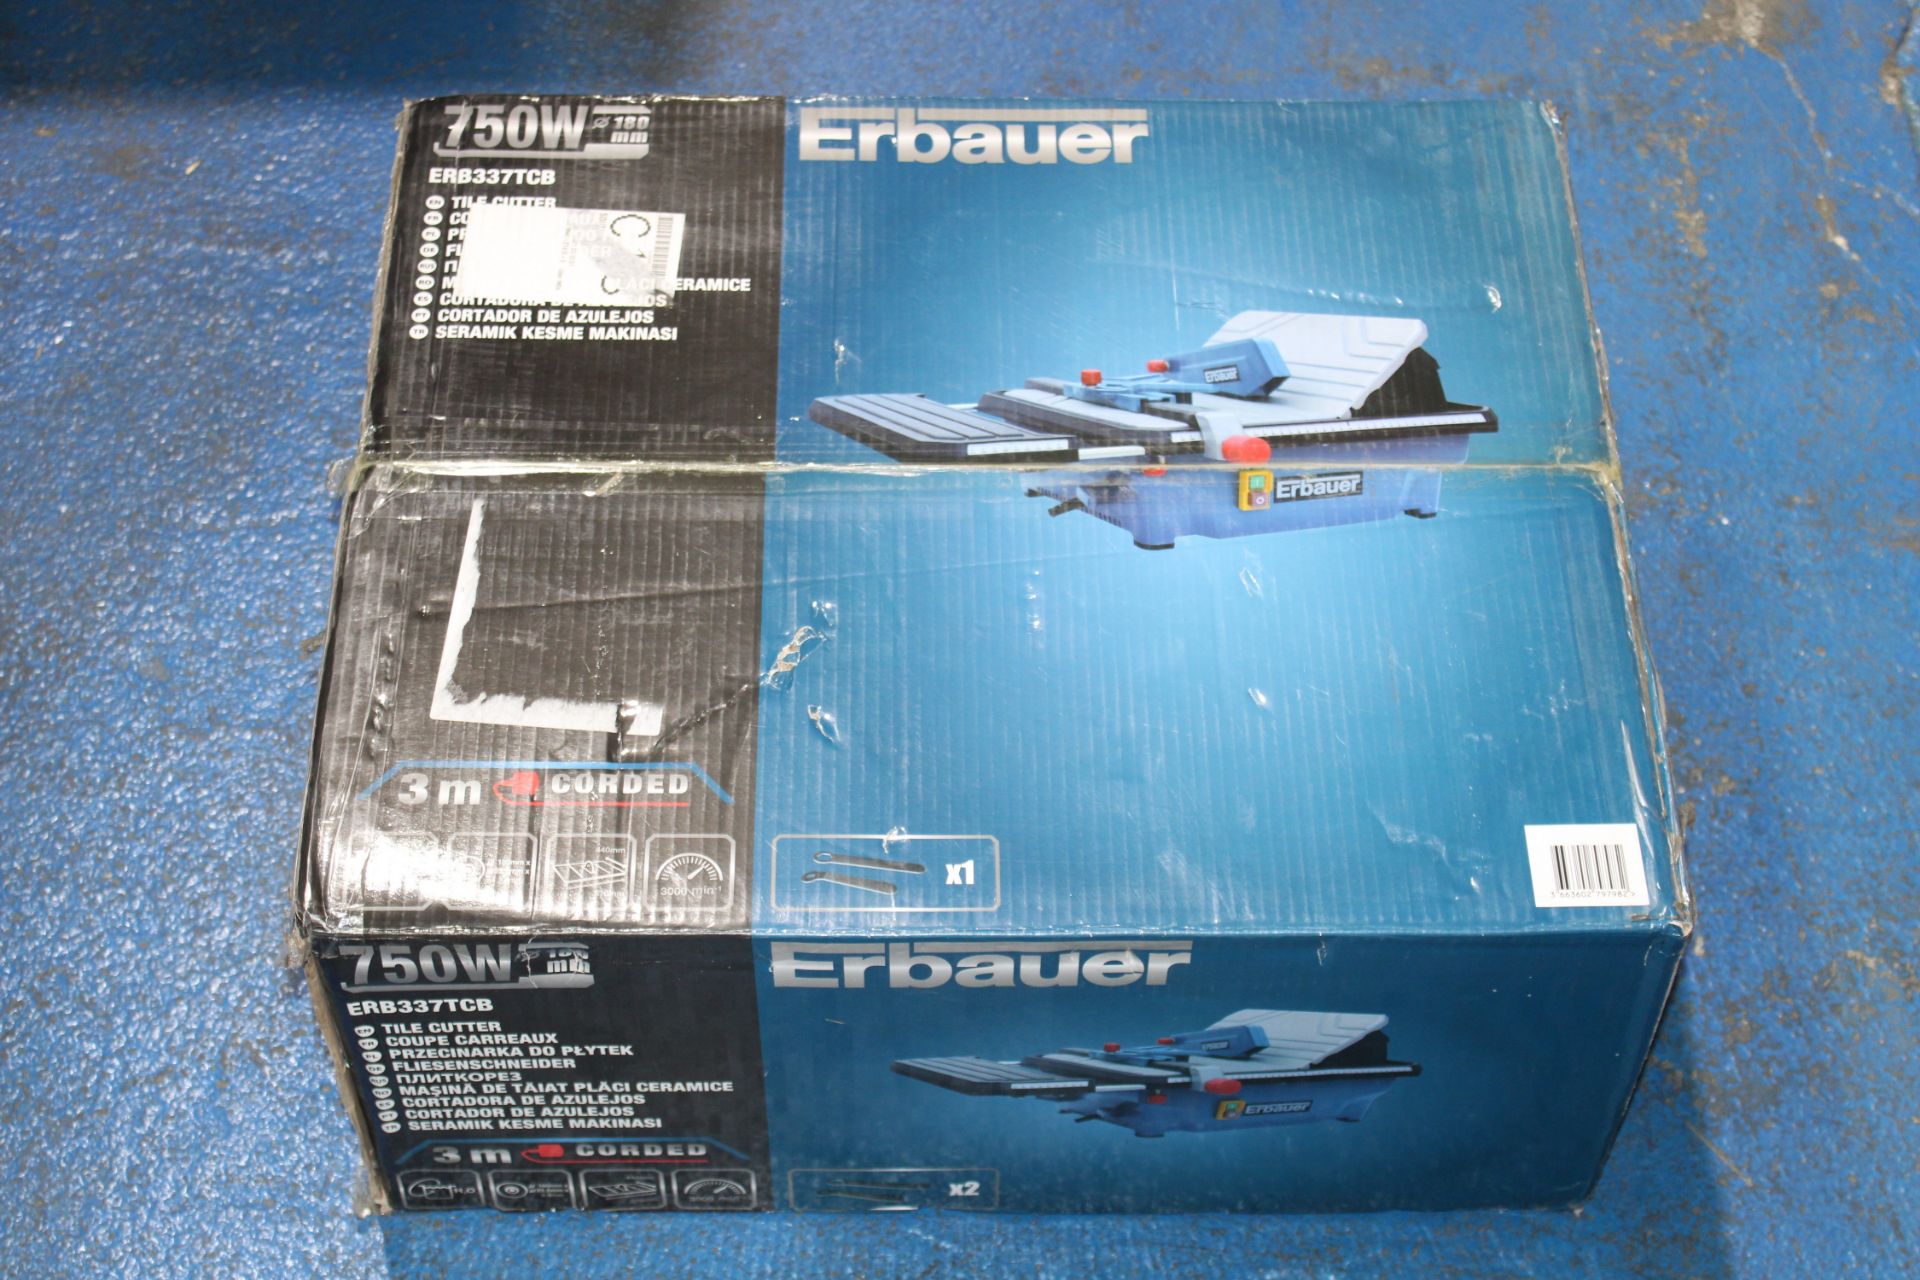 BOXED ERBAUER 750W TILE CUTTER MODEL: ERB337TCB RRP £99.00Condition ReportAppraisal Available on